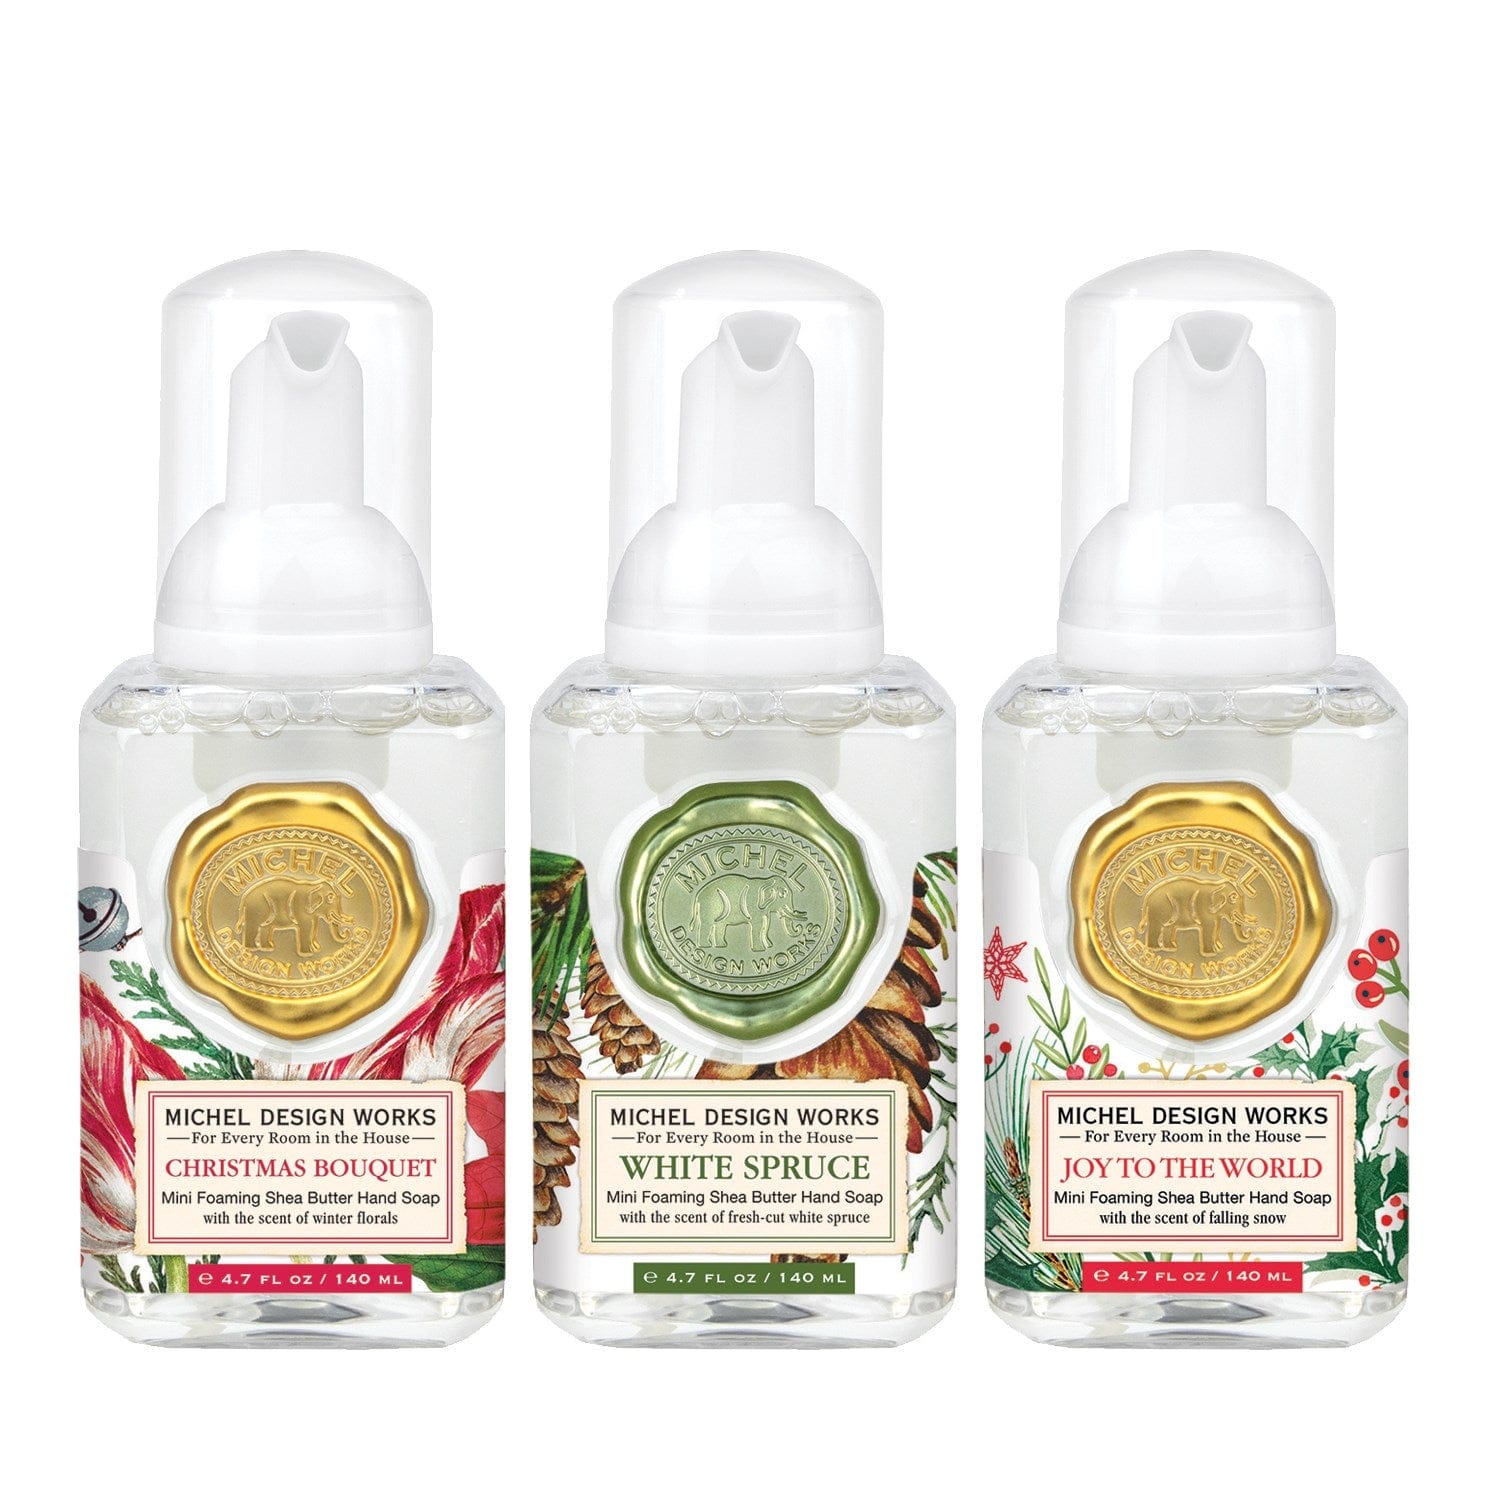 Michel Design Works Foaming Hand Soap Michel Design Works Mini Foaming Hand Soap Set - Christmas - Christmas Bouquet, White Spruce, Joy to the World